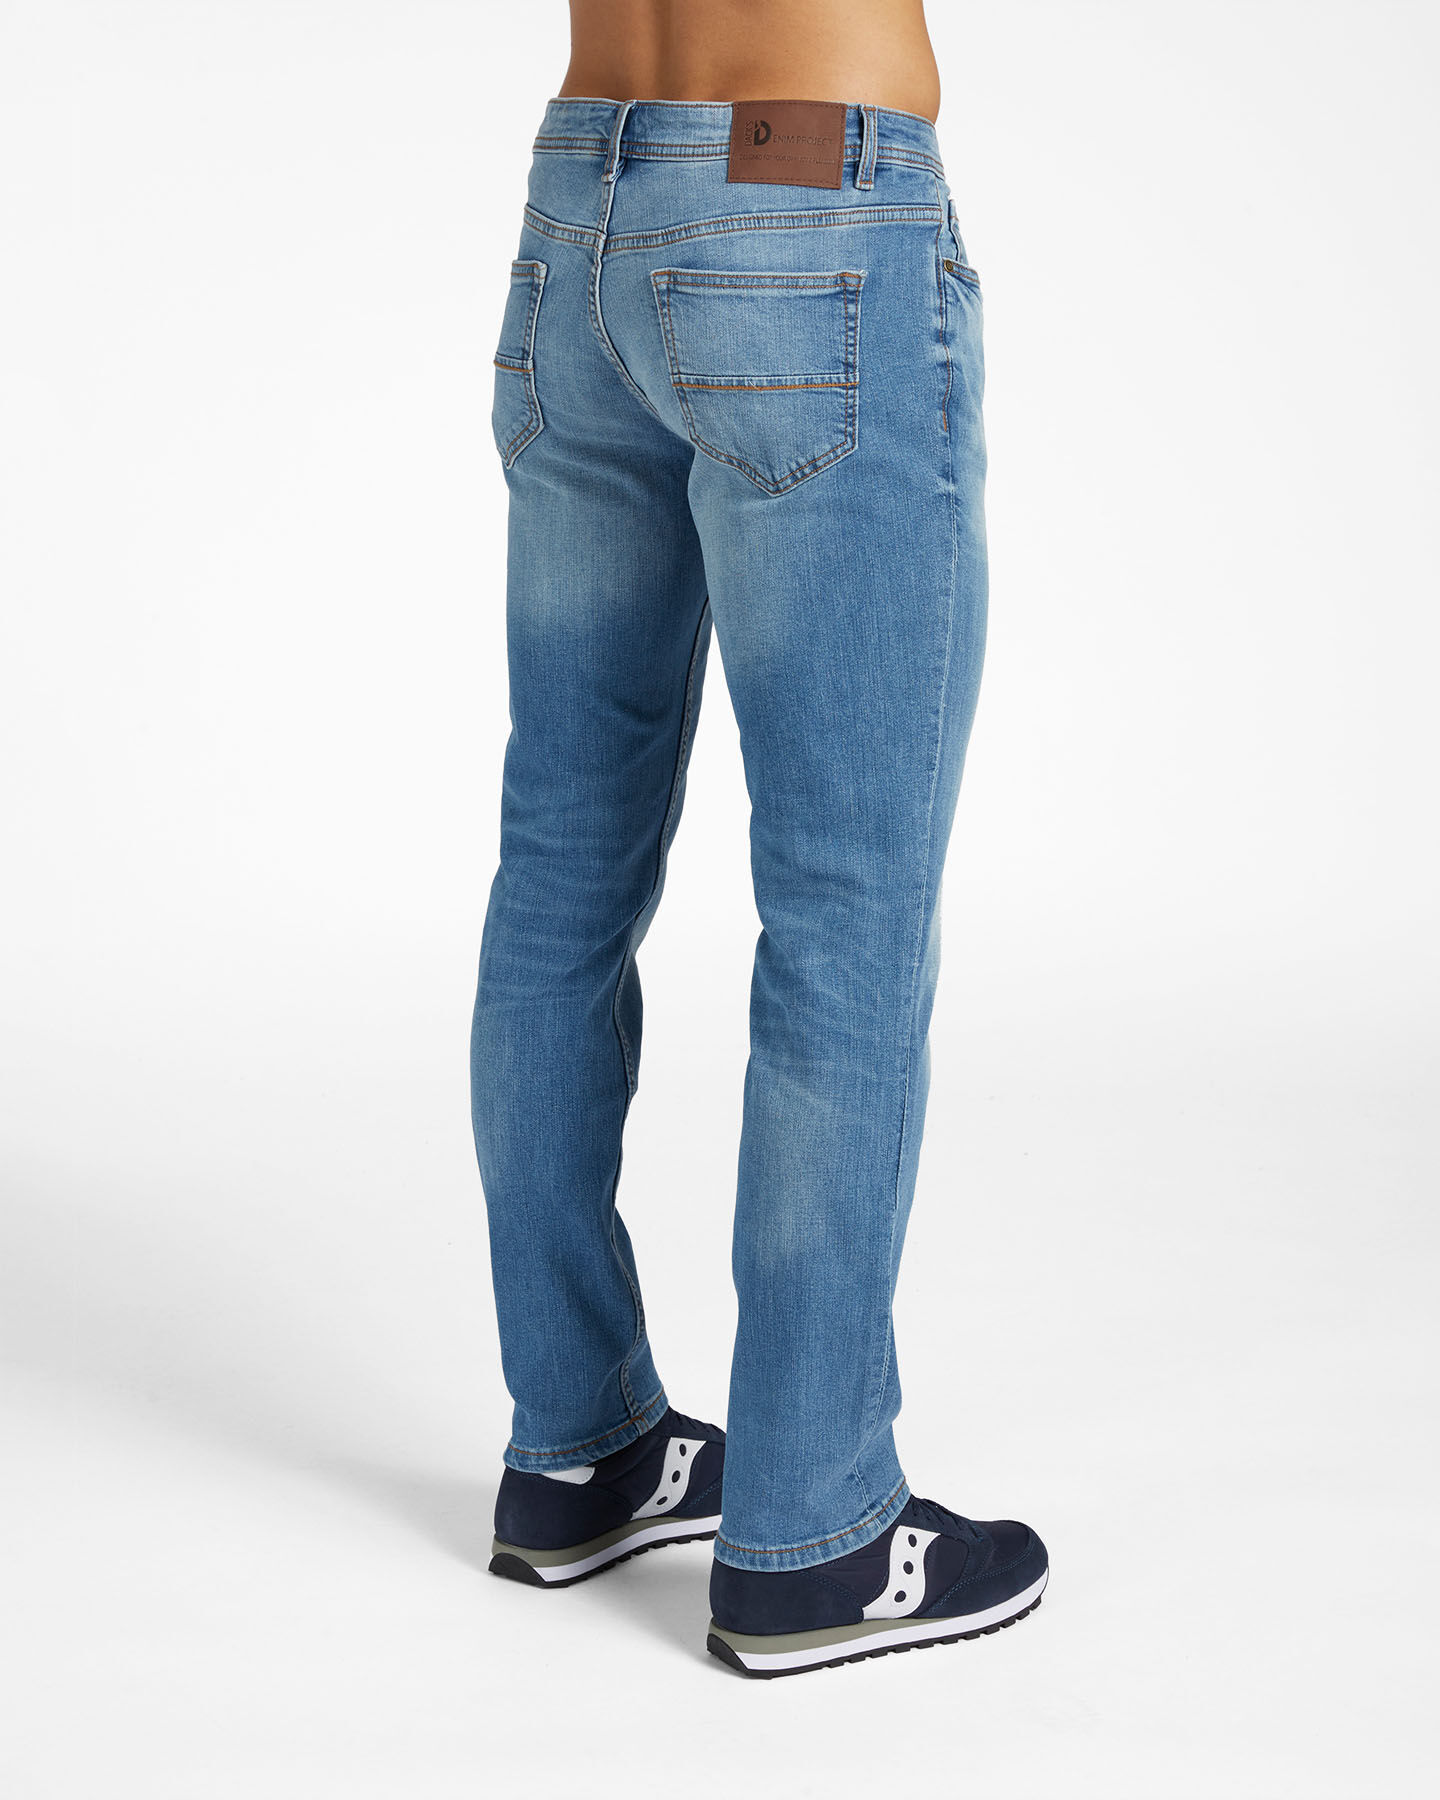  Jeans DACK'S CASUAL CITY M S4106779|MD|44 scatto 1